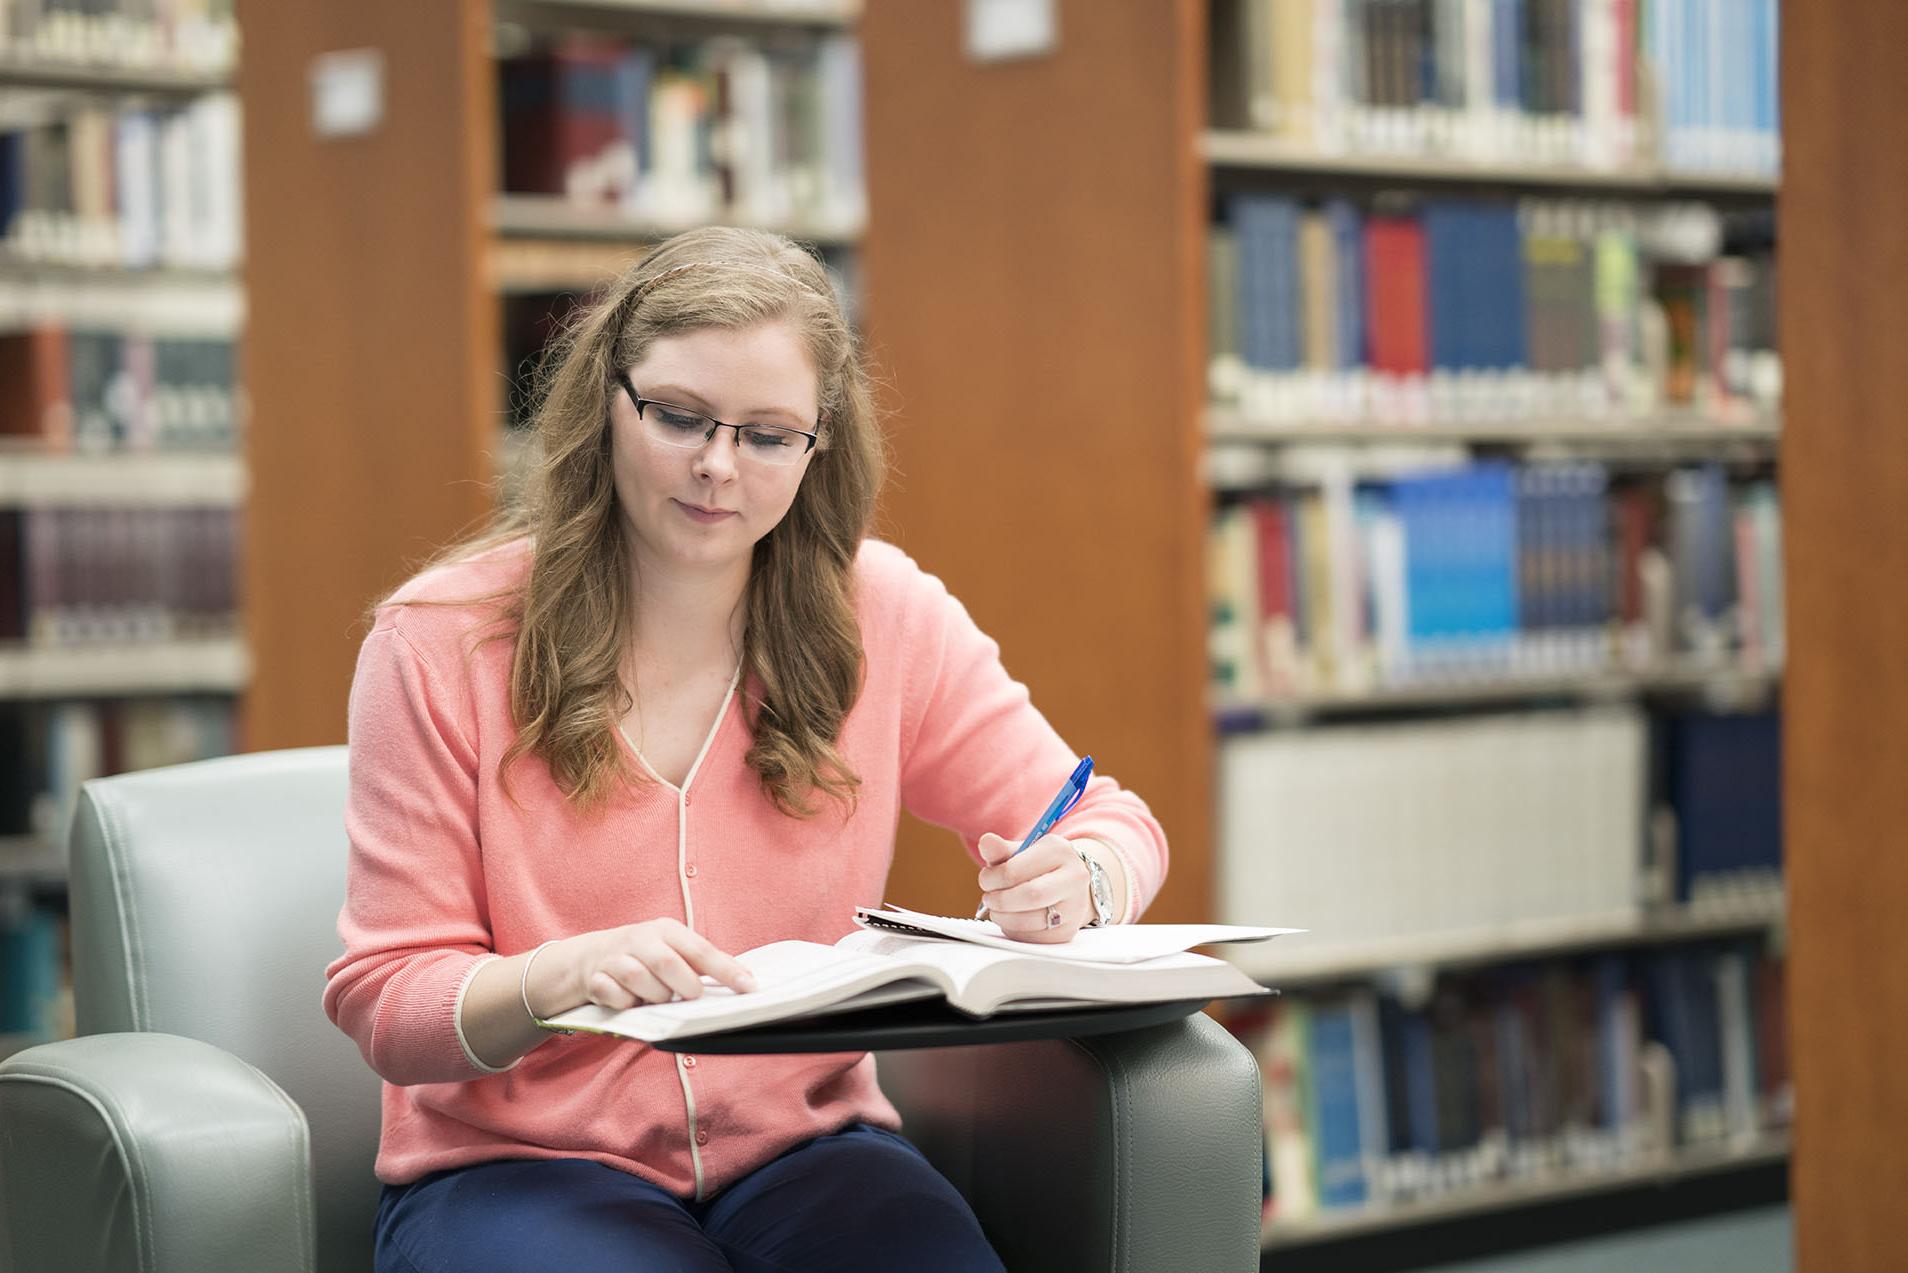 Student Studying in Kares Library